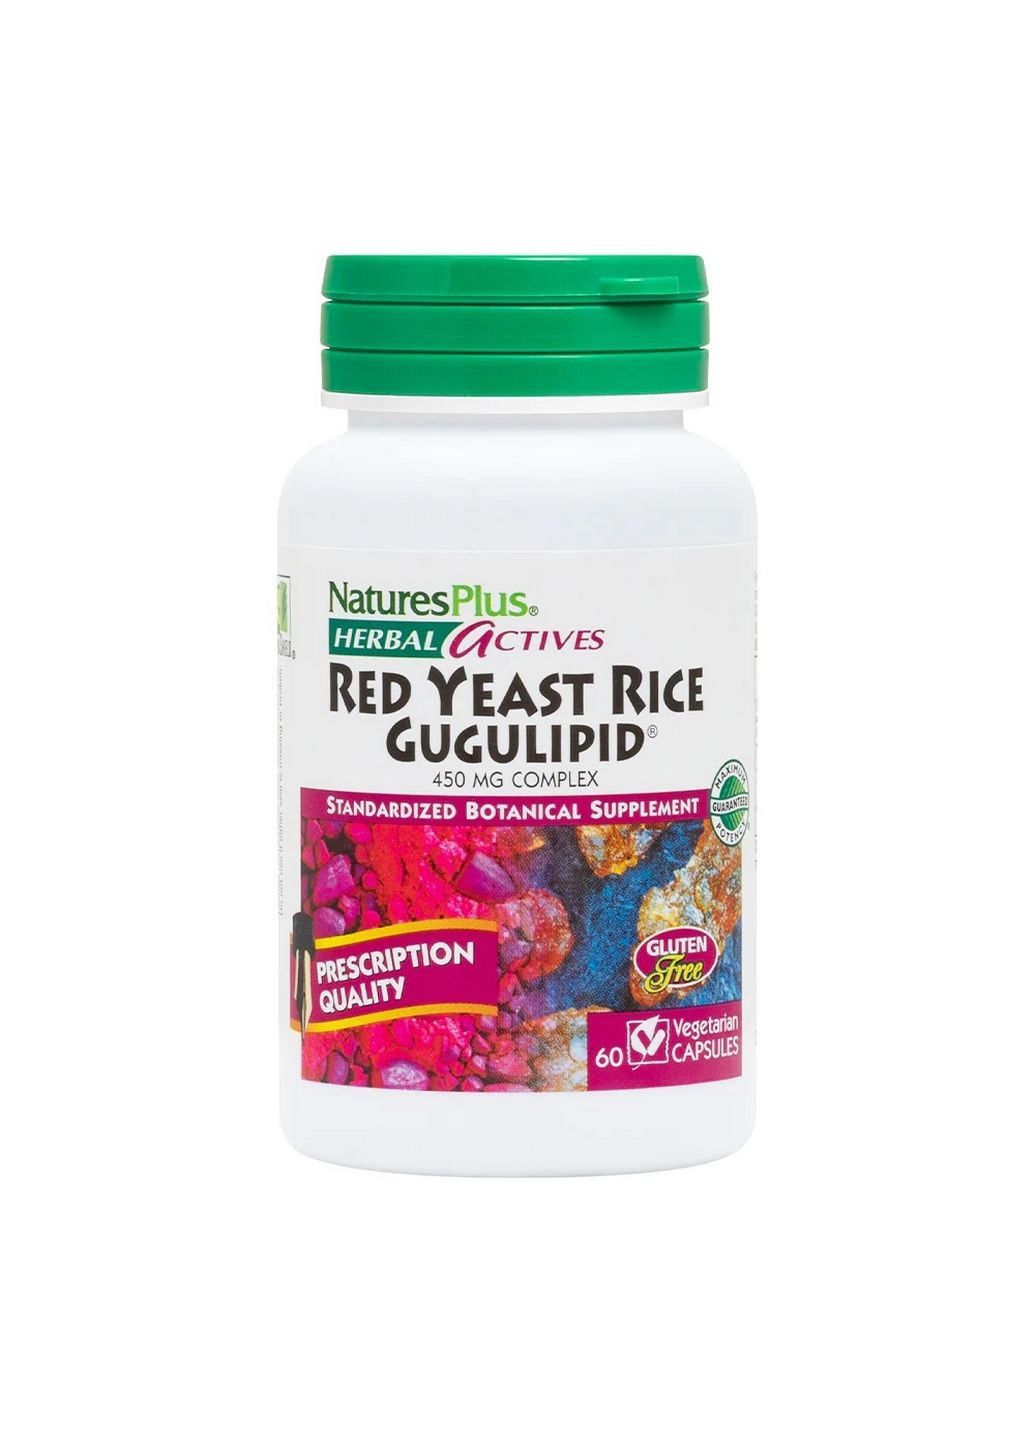 Натуральна добавка Herbal Actives Red Yeast Rice Gugulipid, 60 капсул Natures Plus (293420924)